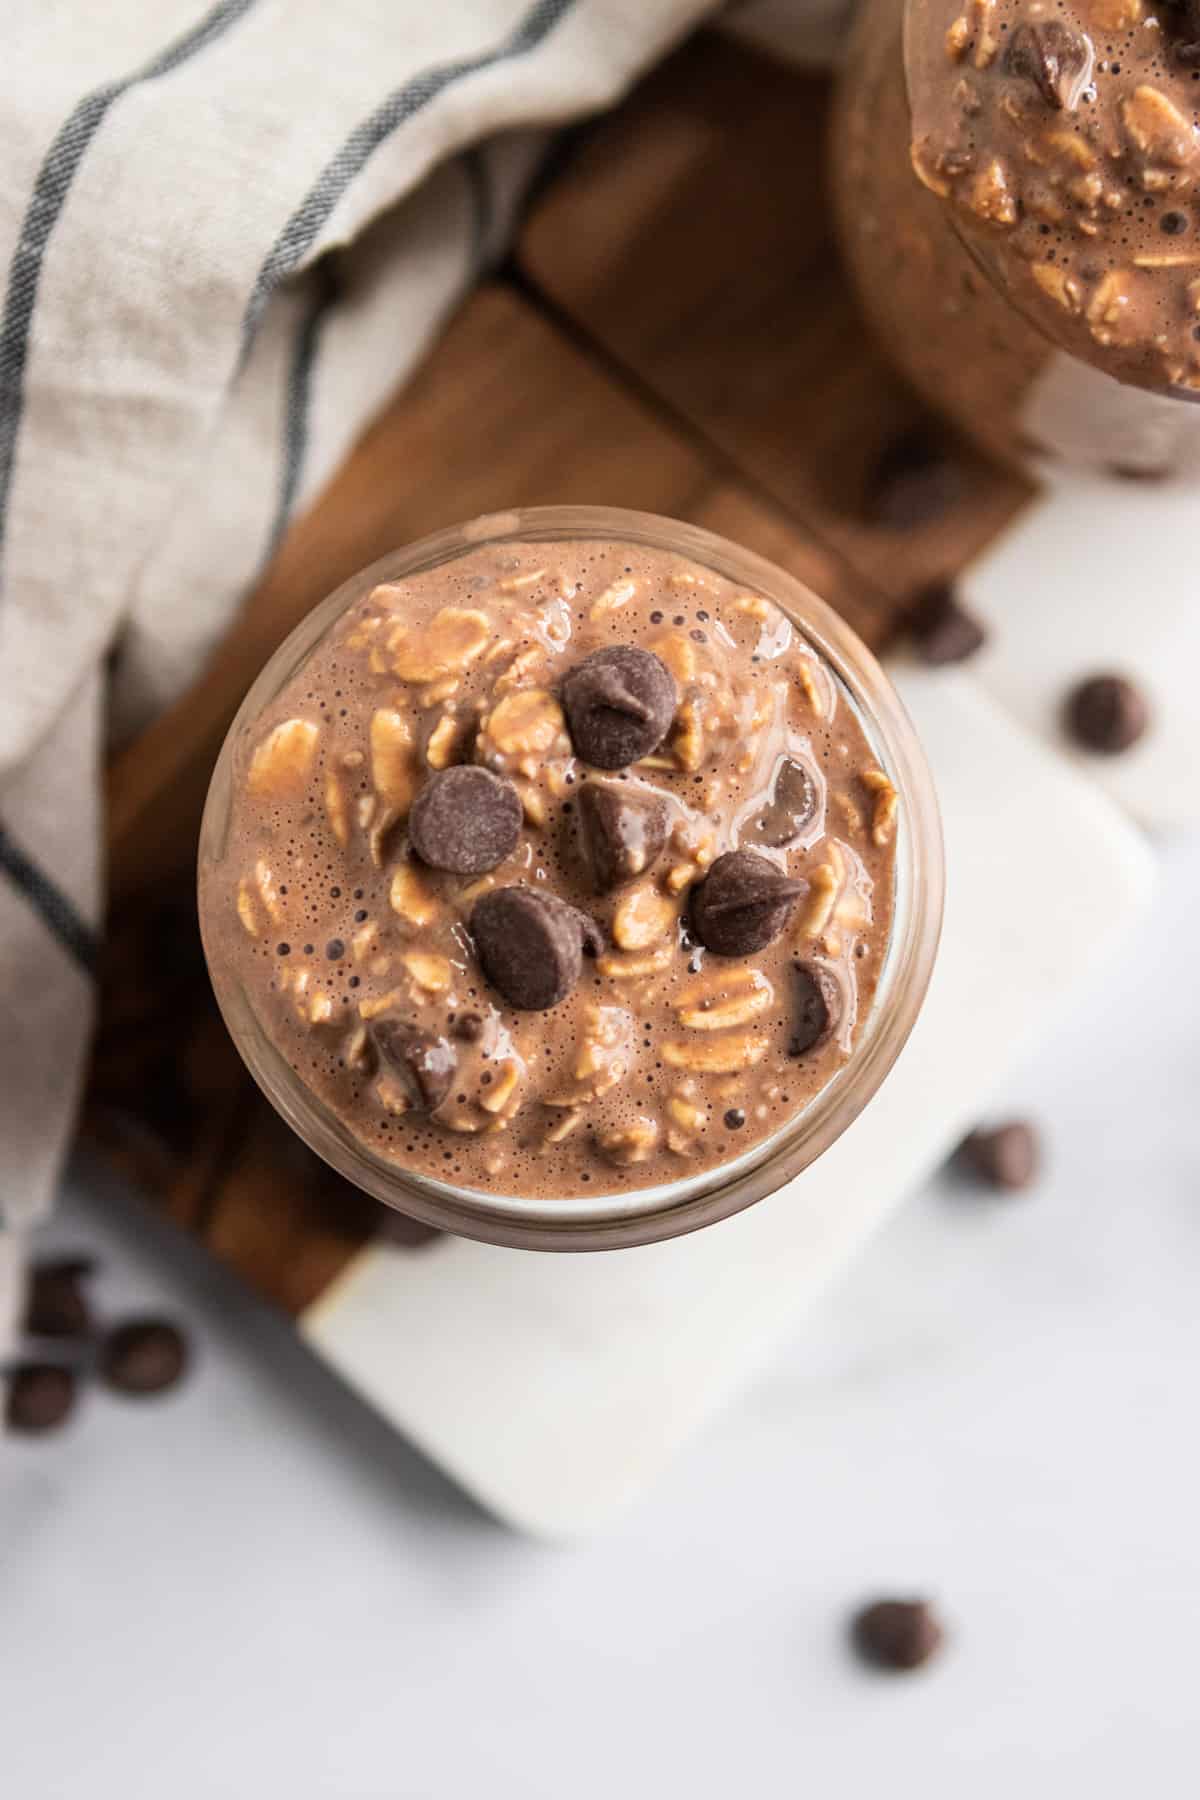 Overhead shot of chocolate overnight oats with chocolate chips.